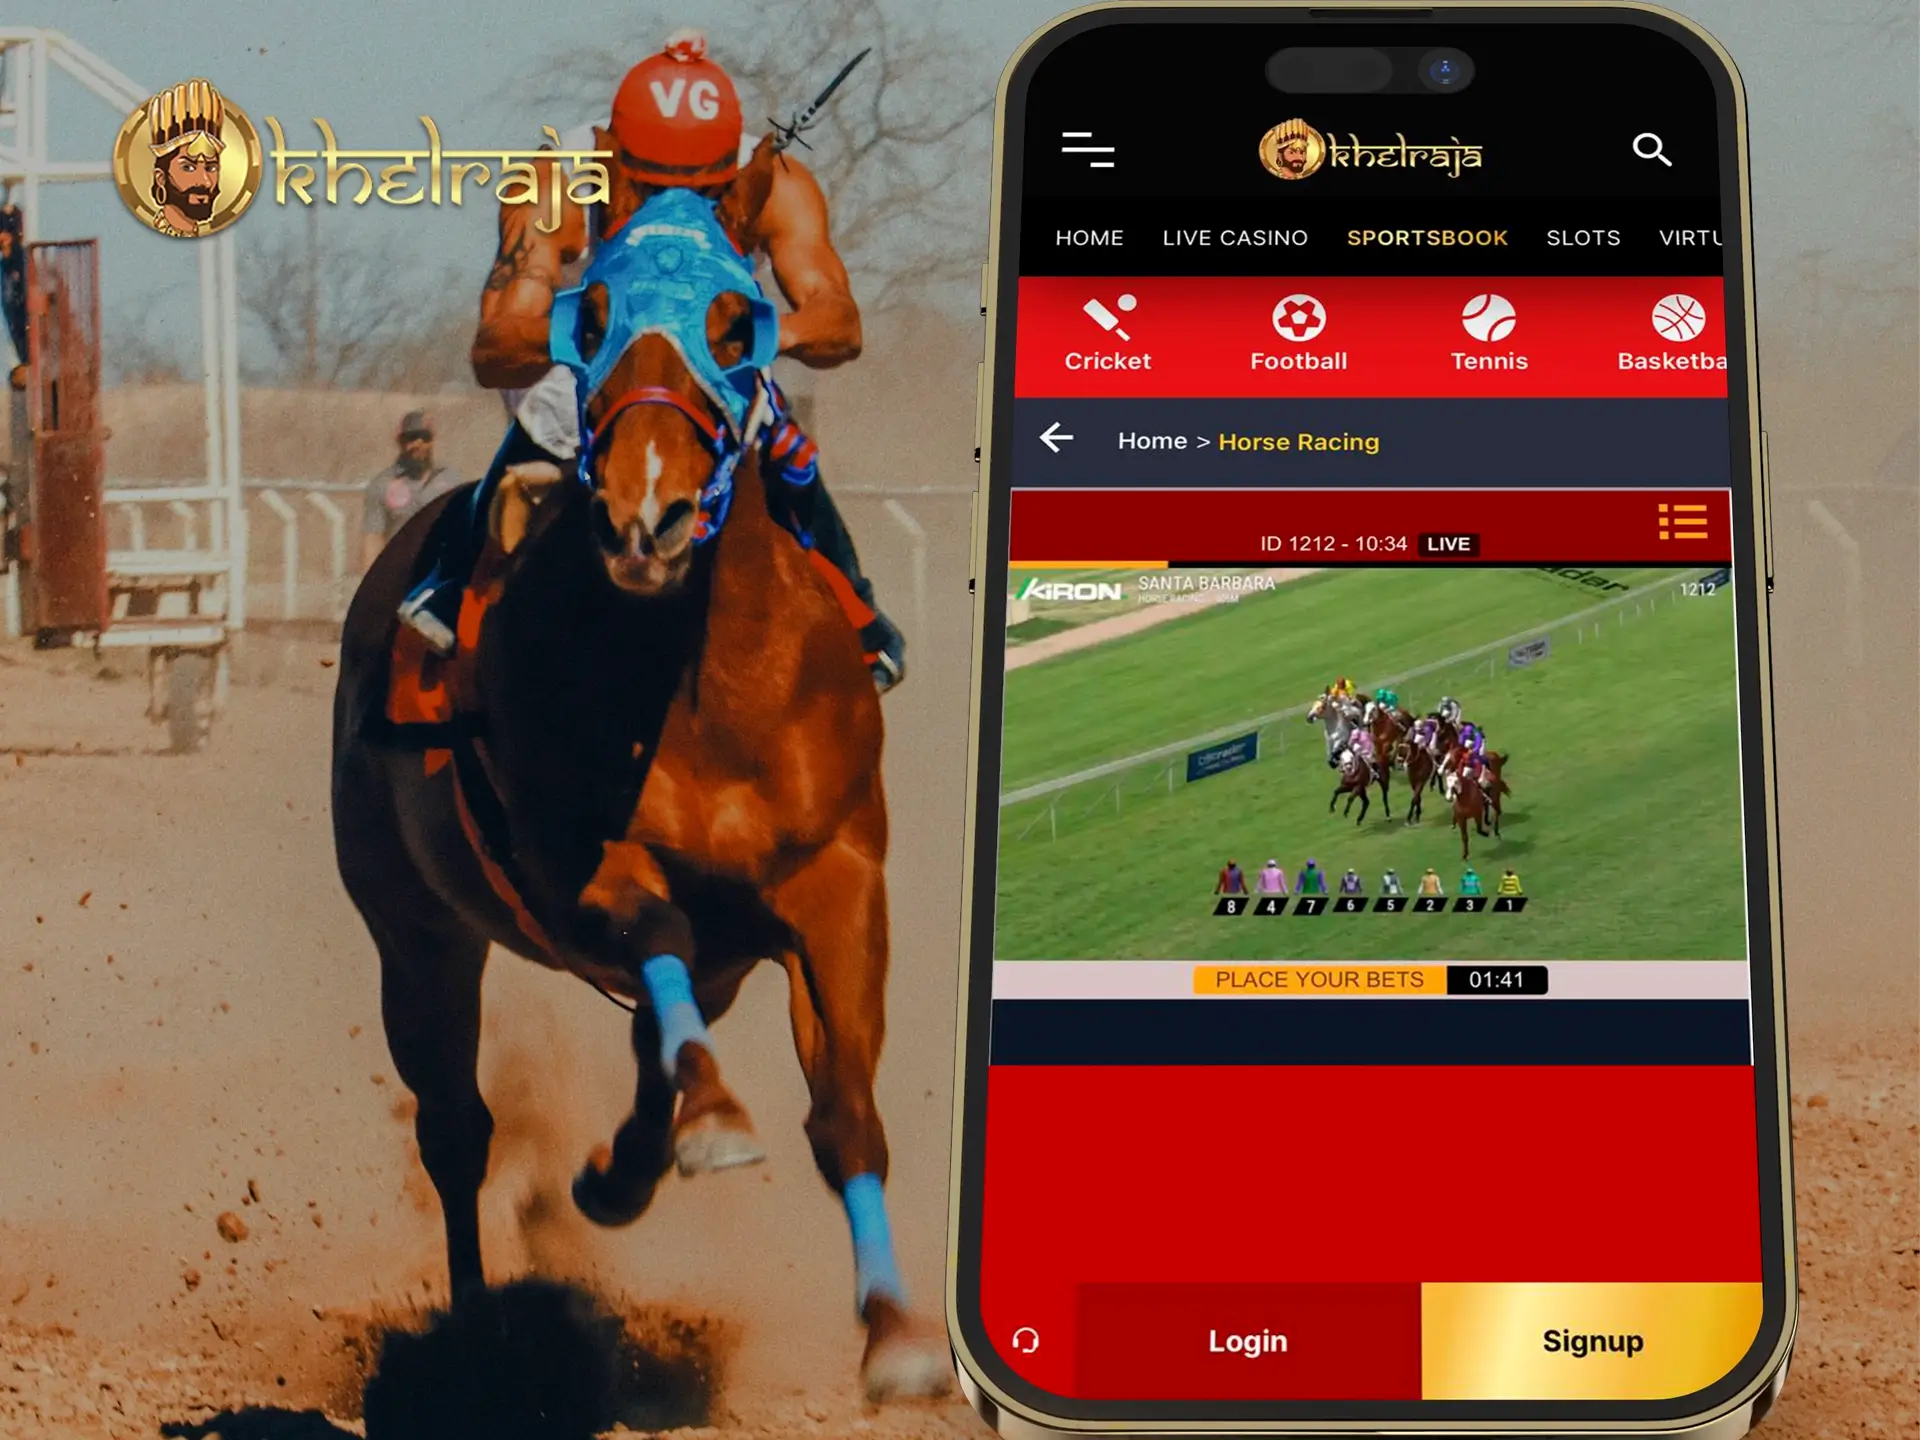 Turn your device to enjoy full screen racing in the Khelraja app.